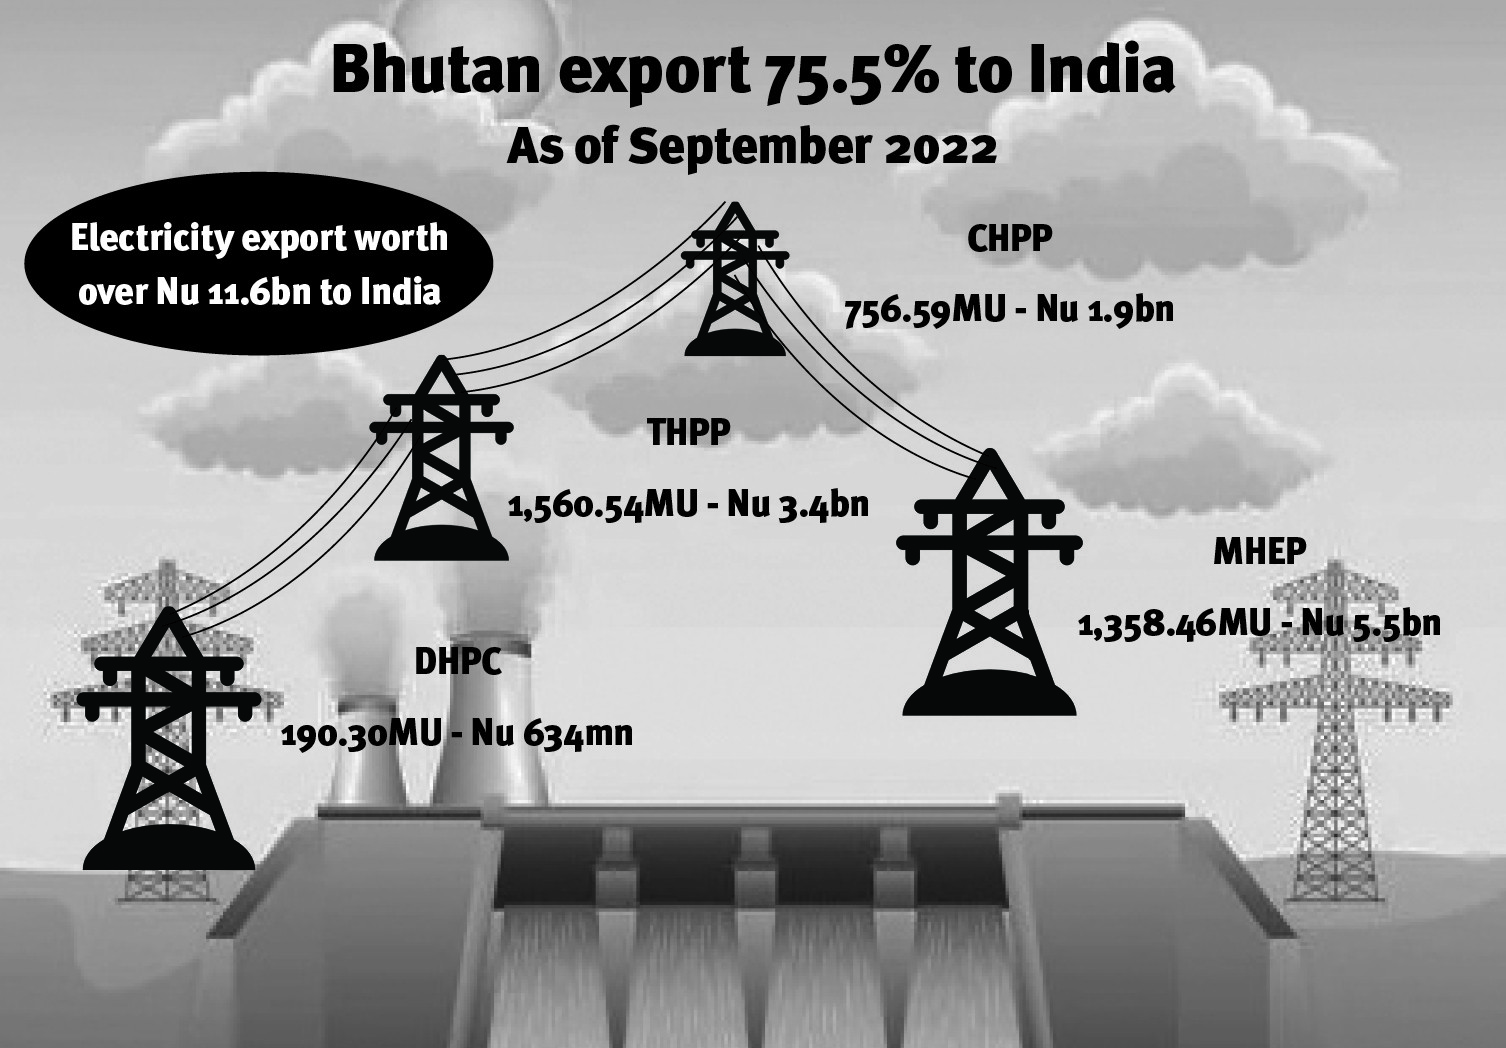 Bhutan exports electricity worth over Nu 11.6bn to India